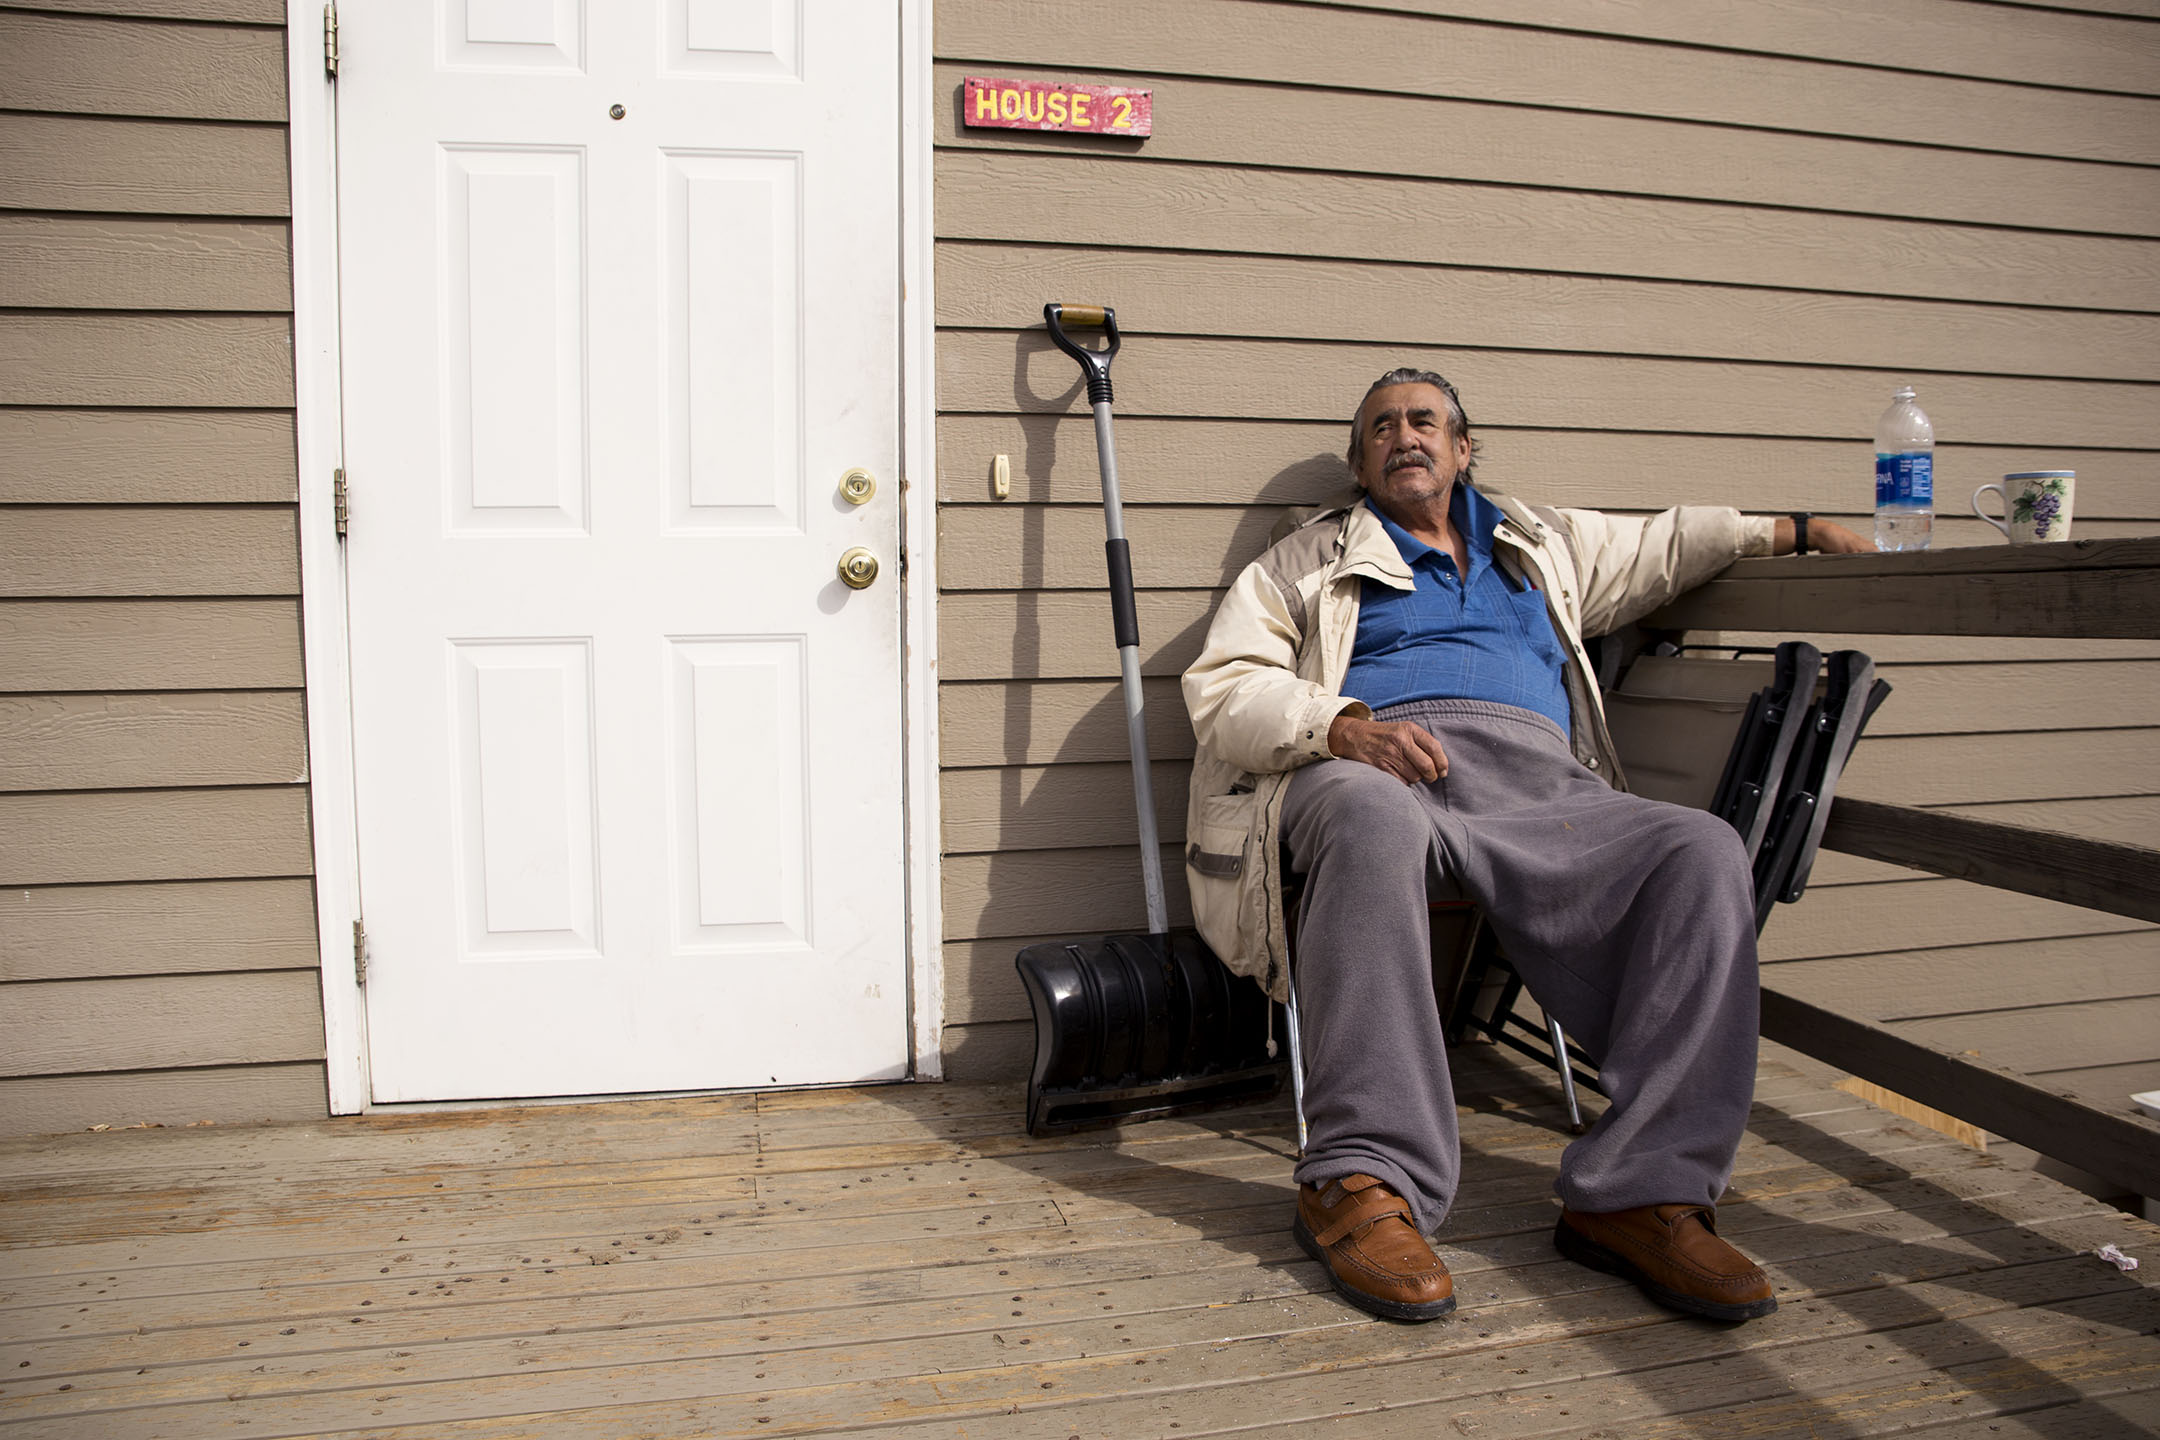 Mitchell Headdress smokes a cigarette on the front porch of the Fort Peck Warriors Center as he waits for his ride to take him to an appointment at the VA in Miles City. He doesn’t have a television or radio, so he spends much of his time sitting outside or reading.